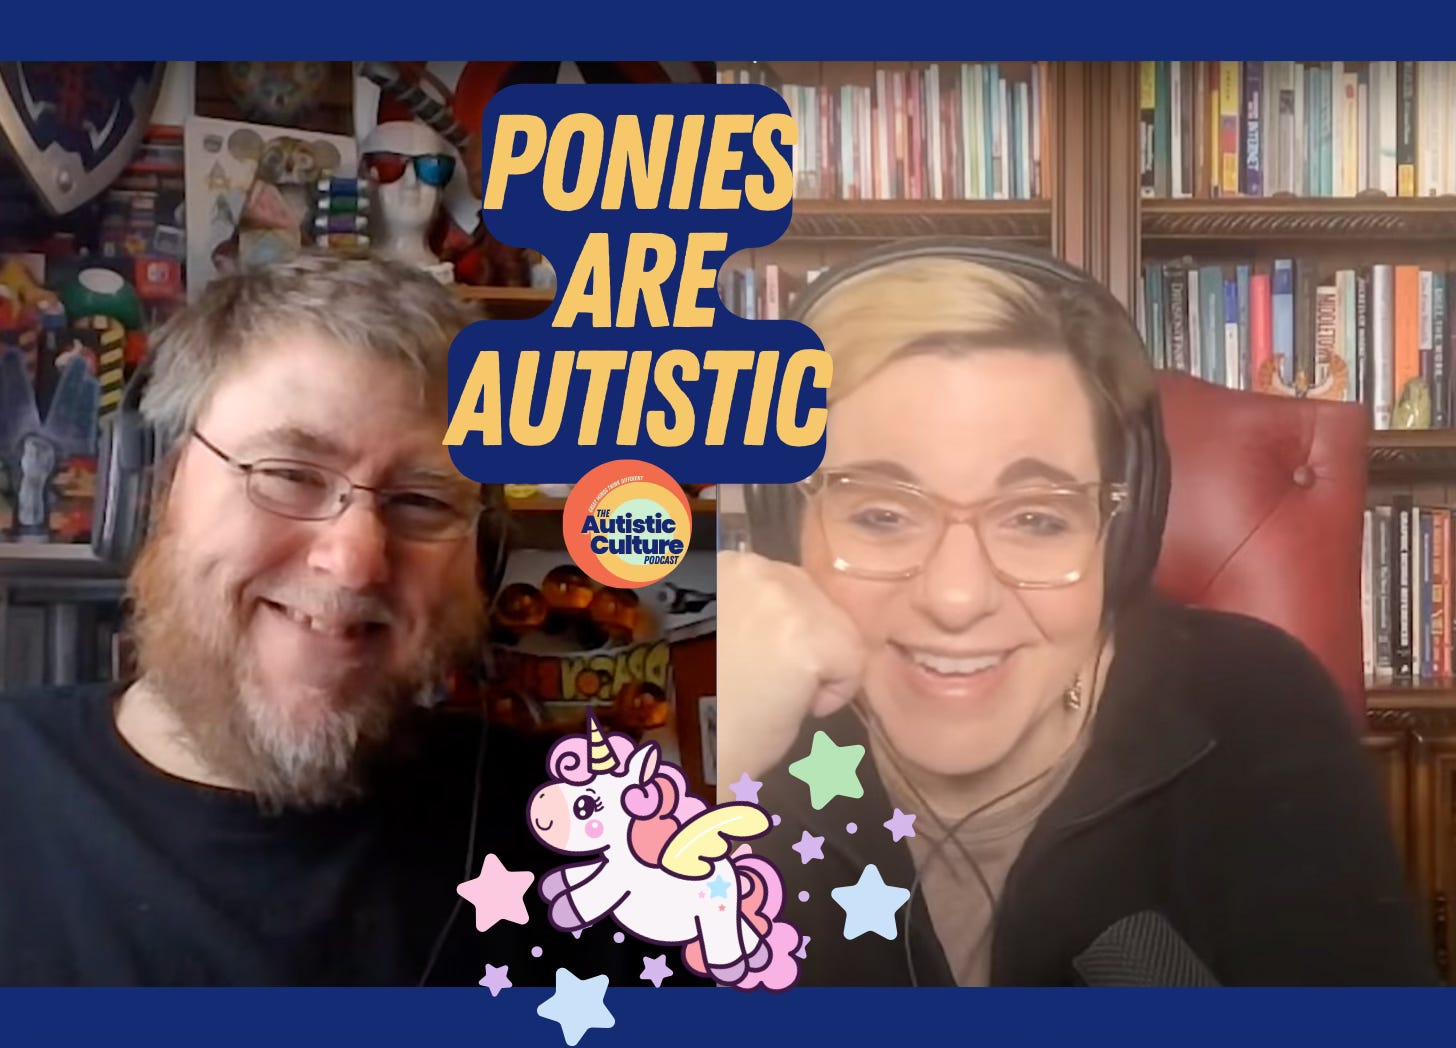 Listen to Autistic podcast hosts discuss: Ponies Are Autistic. Autism podcast | My Little Pony is one of our favorite Autistic characters that delights Autistic children and adults alike!